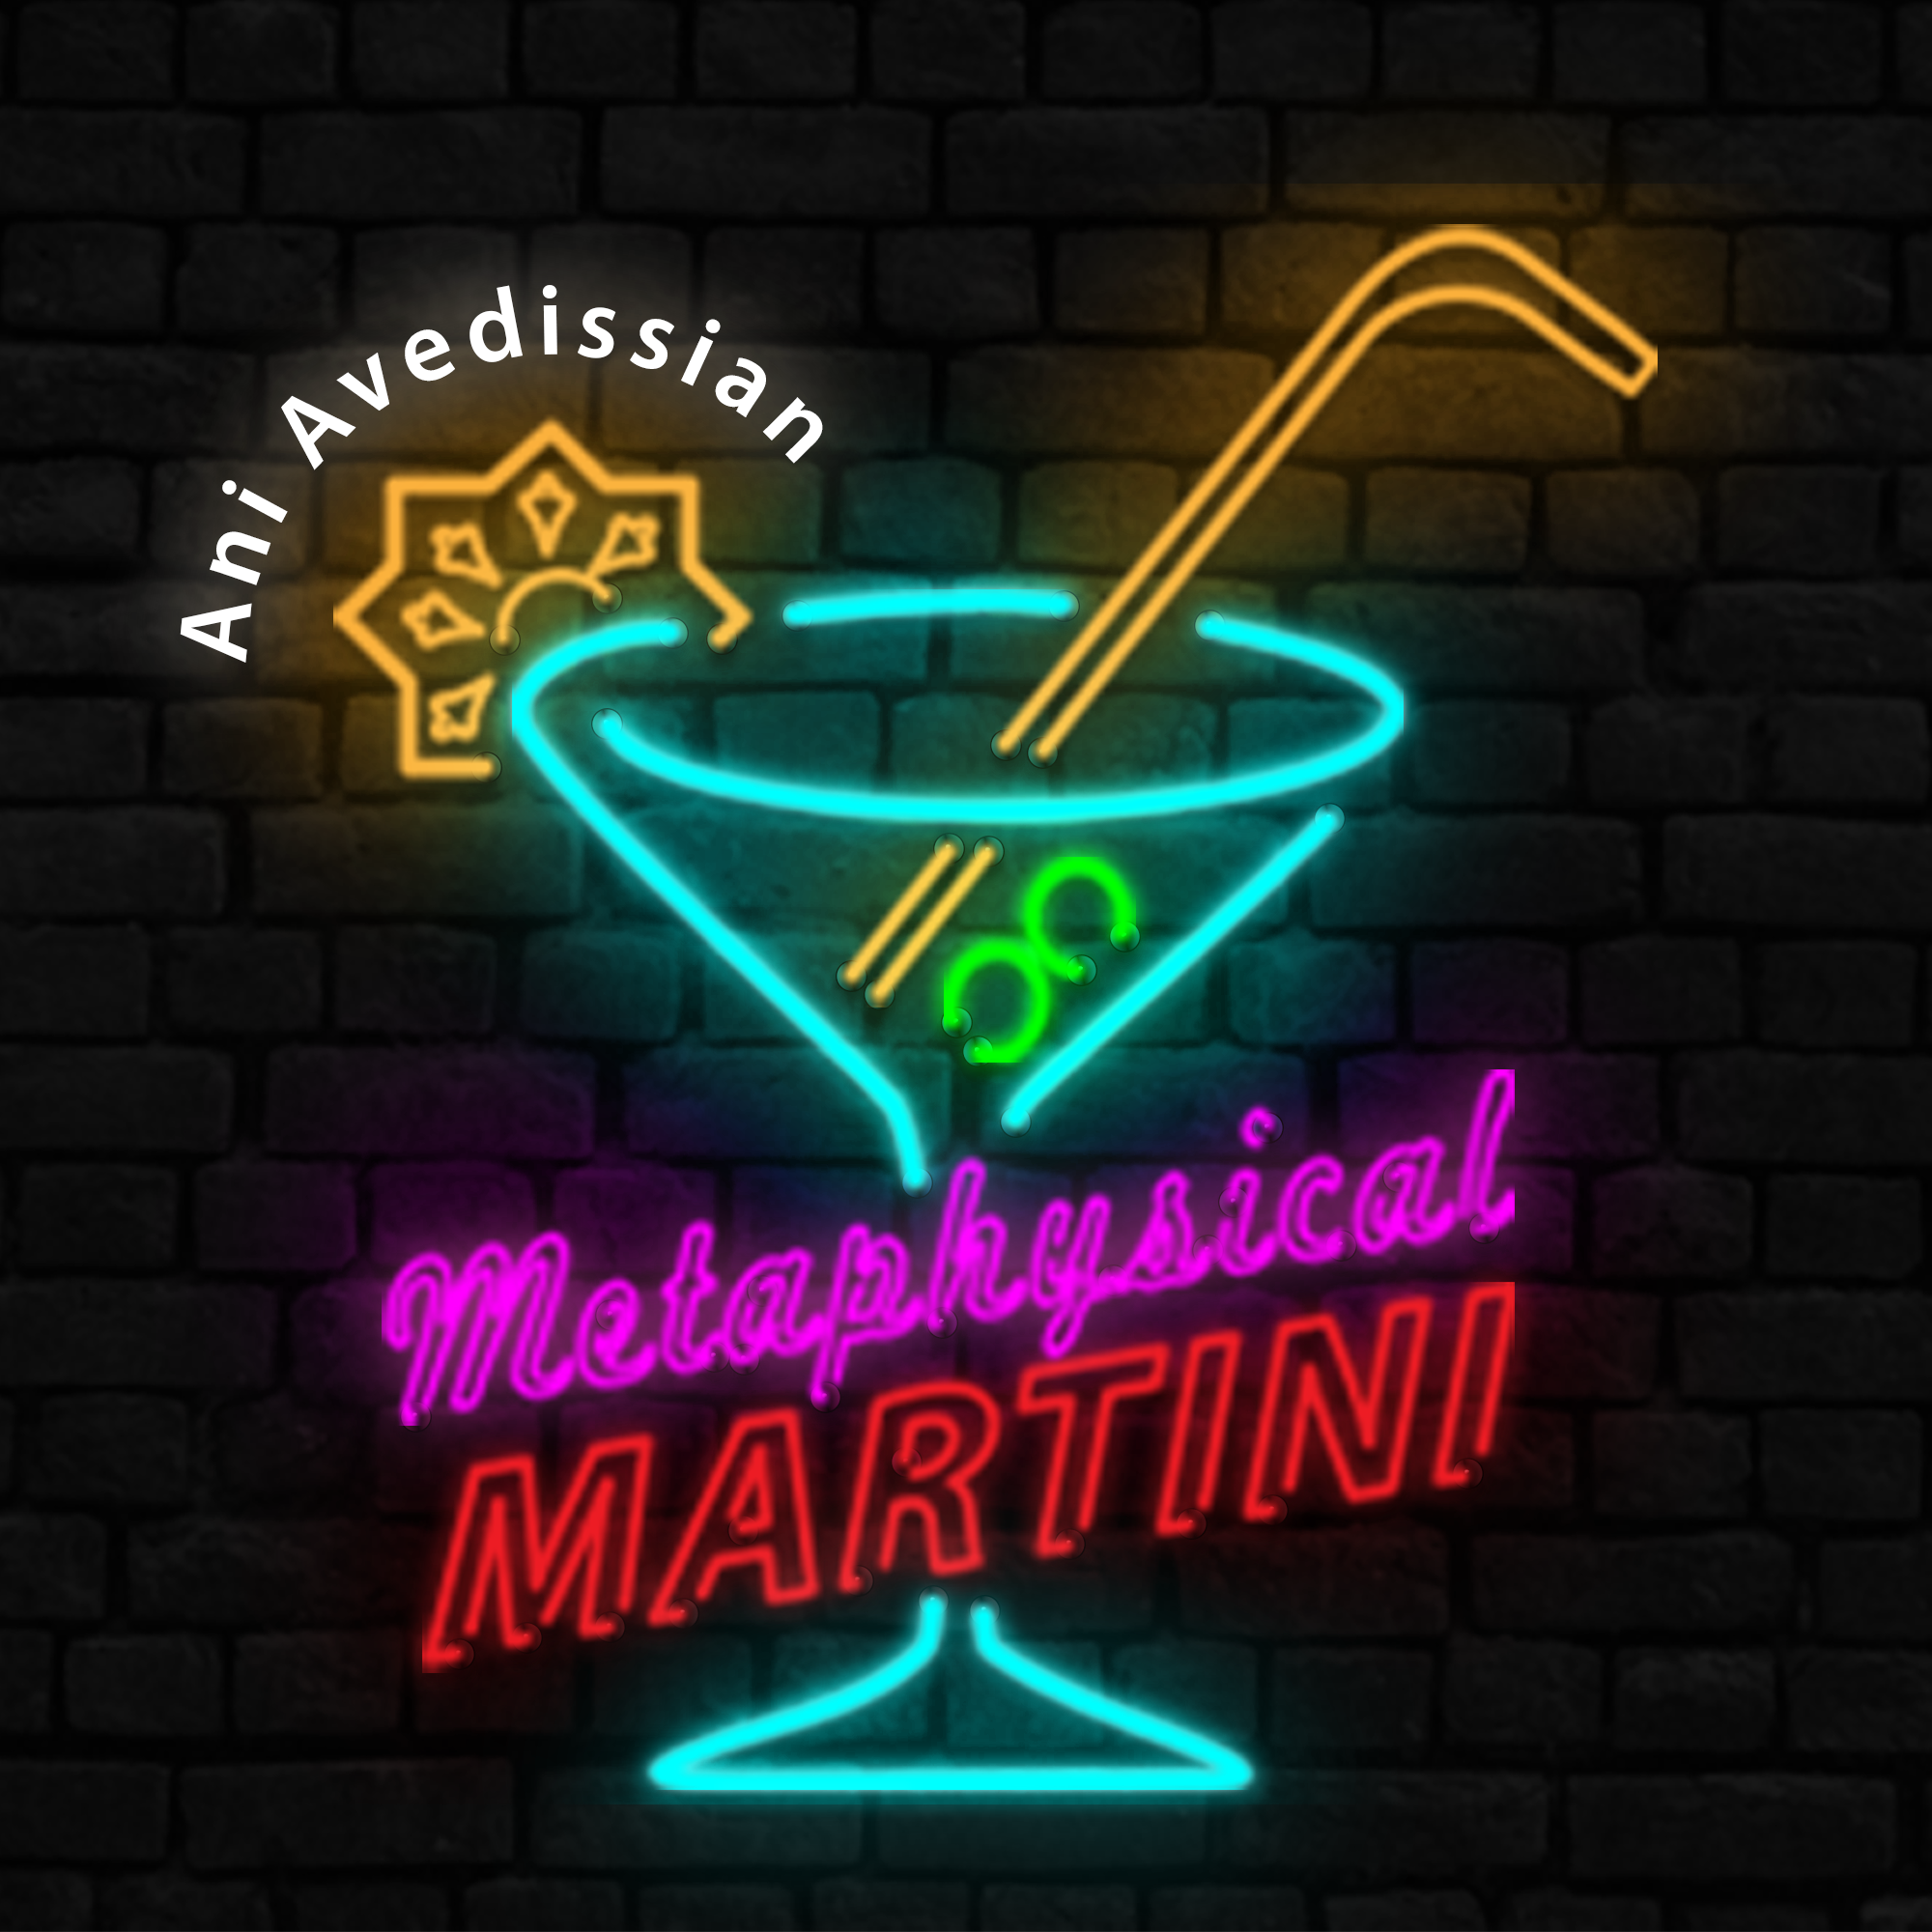 "Metaphysical Martini"   02/02/2022  -  Questions, answers, comments, and cocktails!